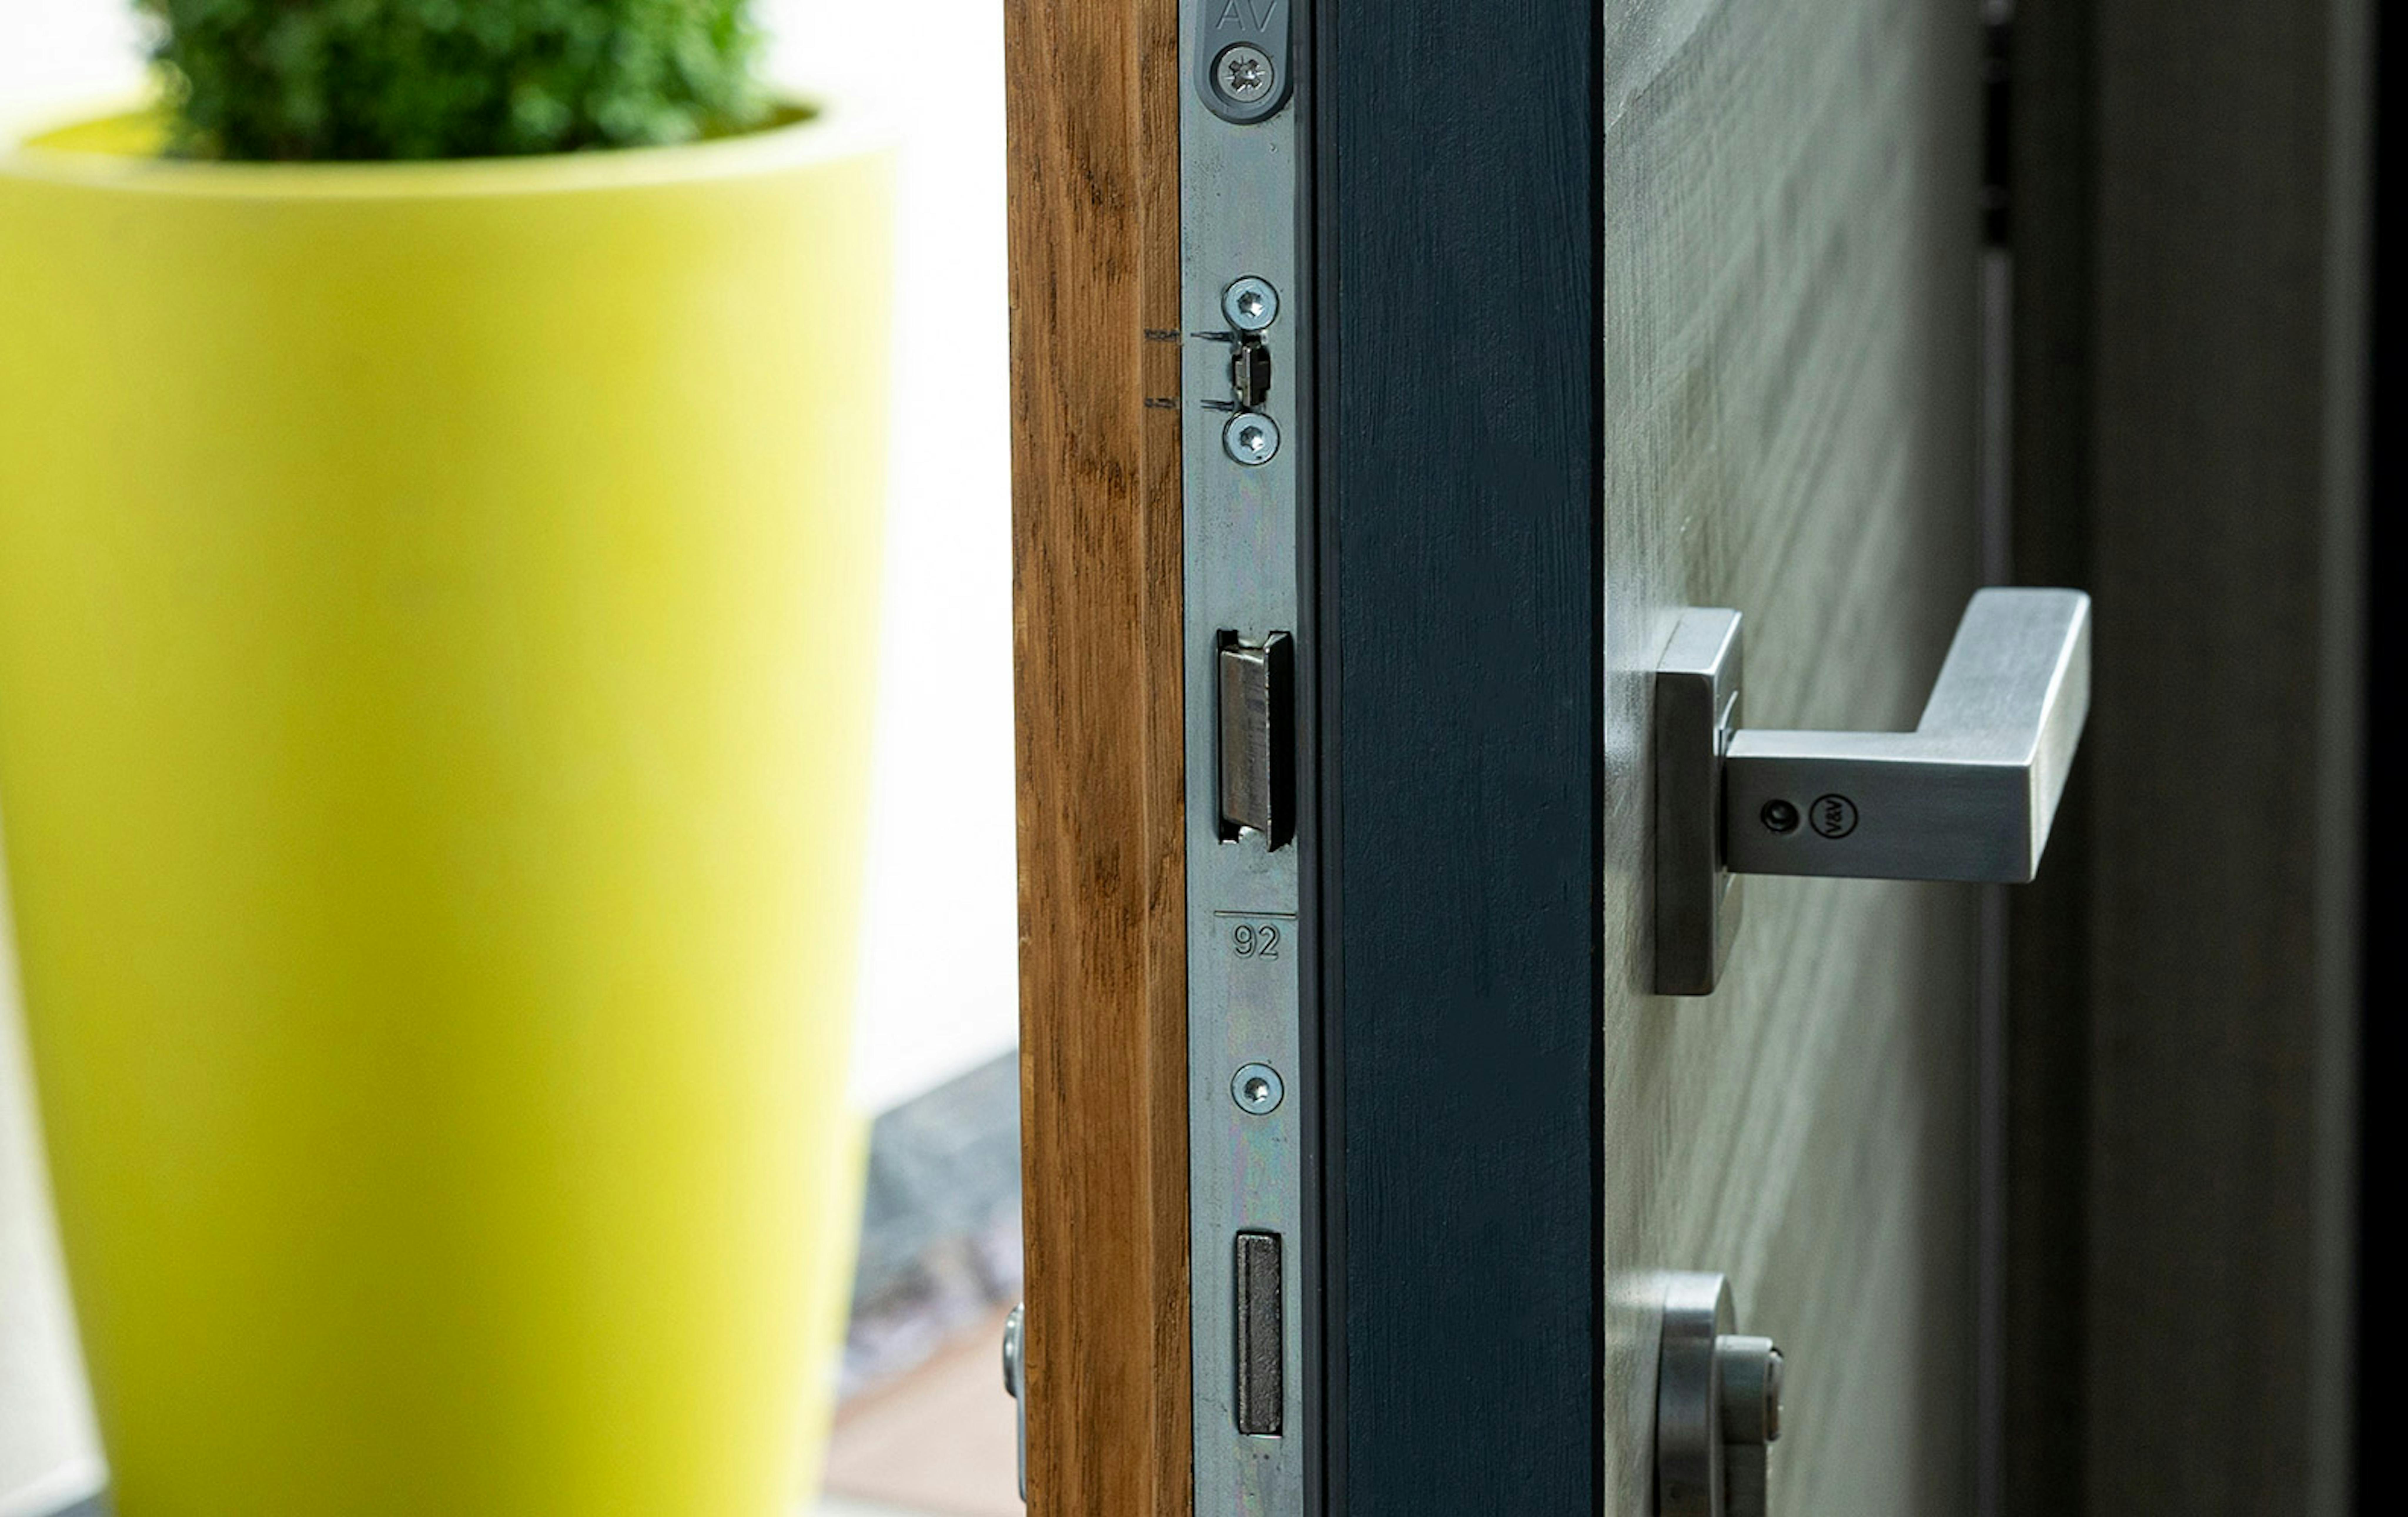 A close-up of the sophisticated locking system on a Deuren front door.